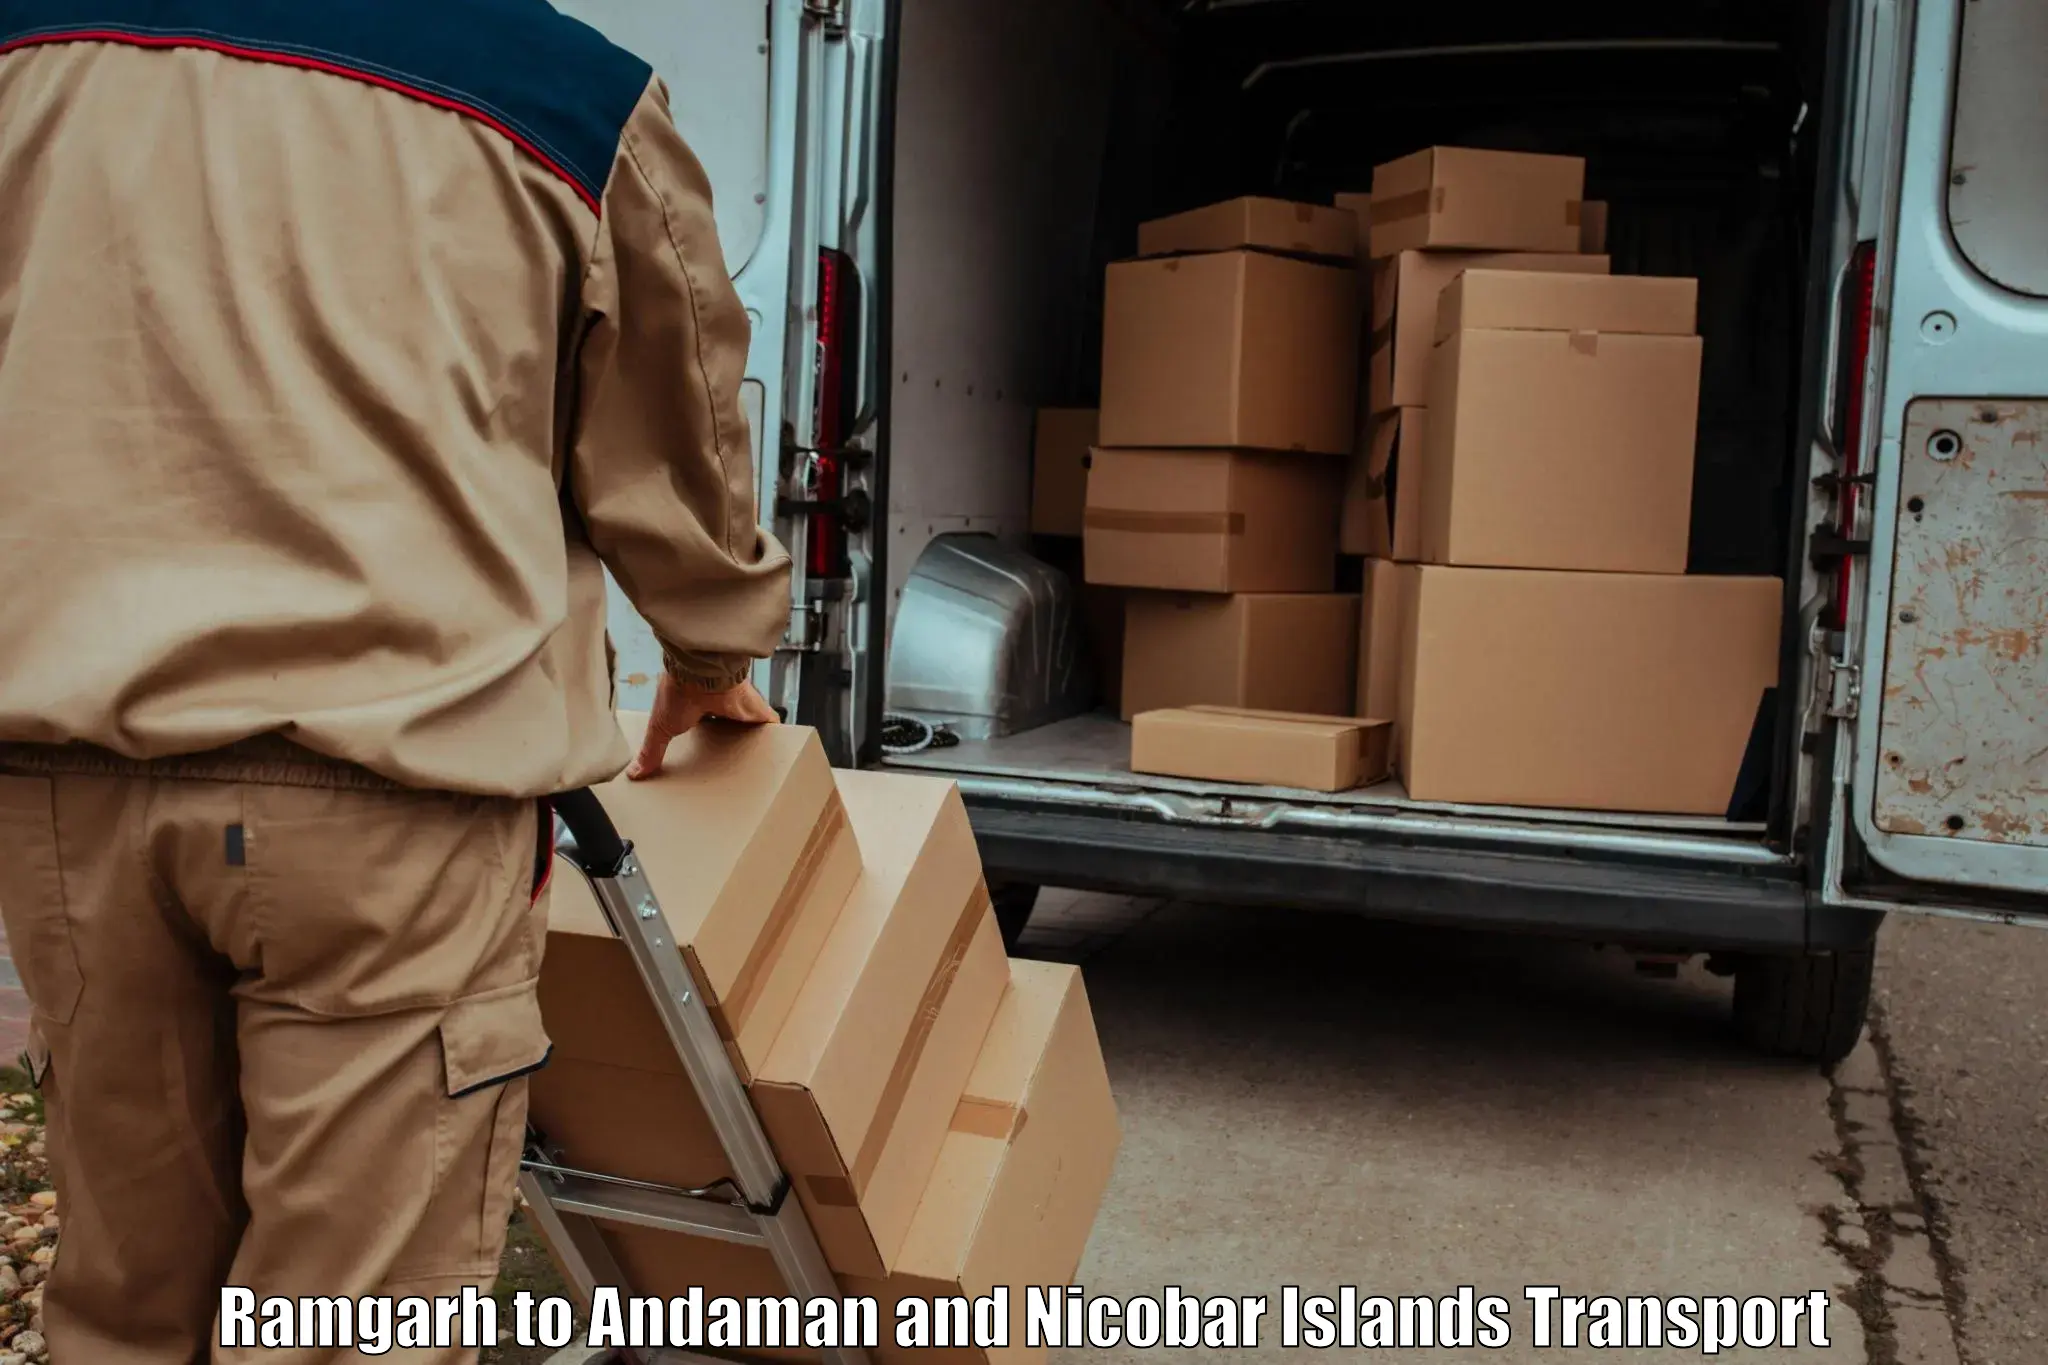 Vehicle transport services in Ramgarh to Andaman and Nicobar Islands